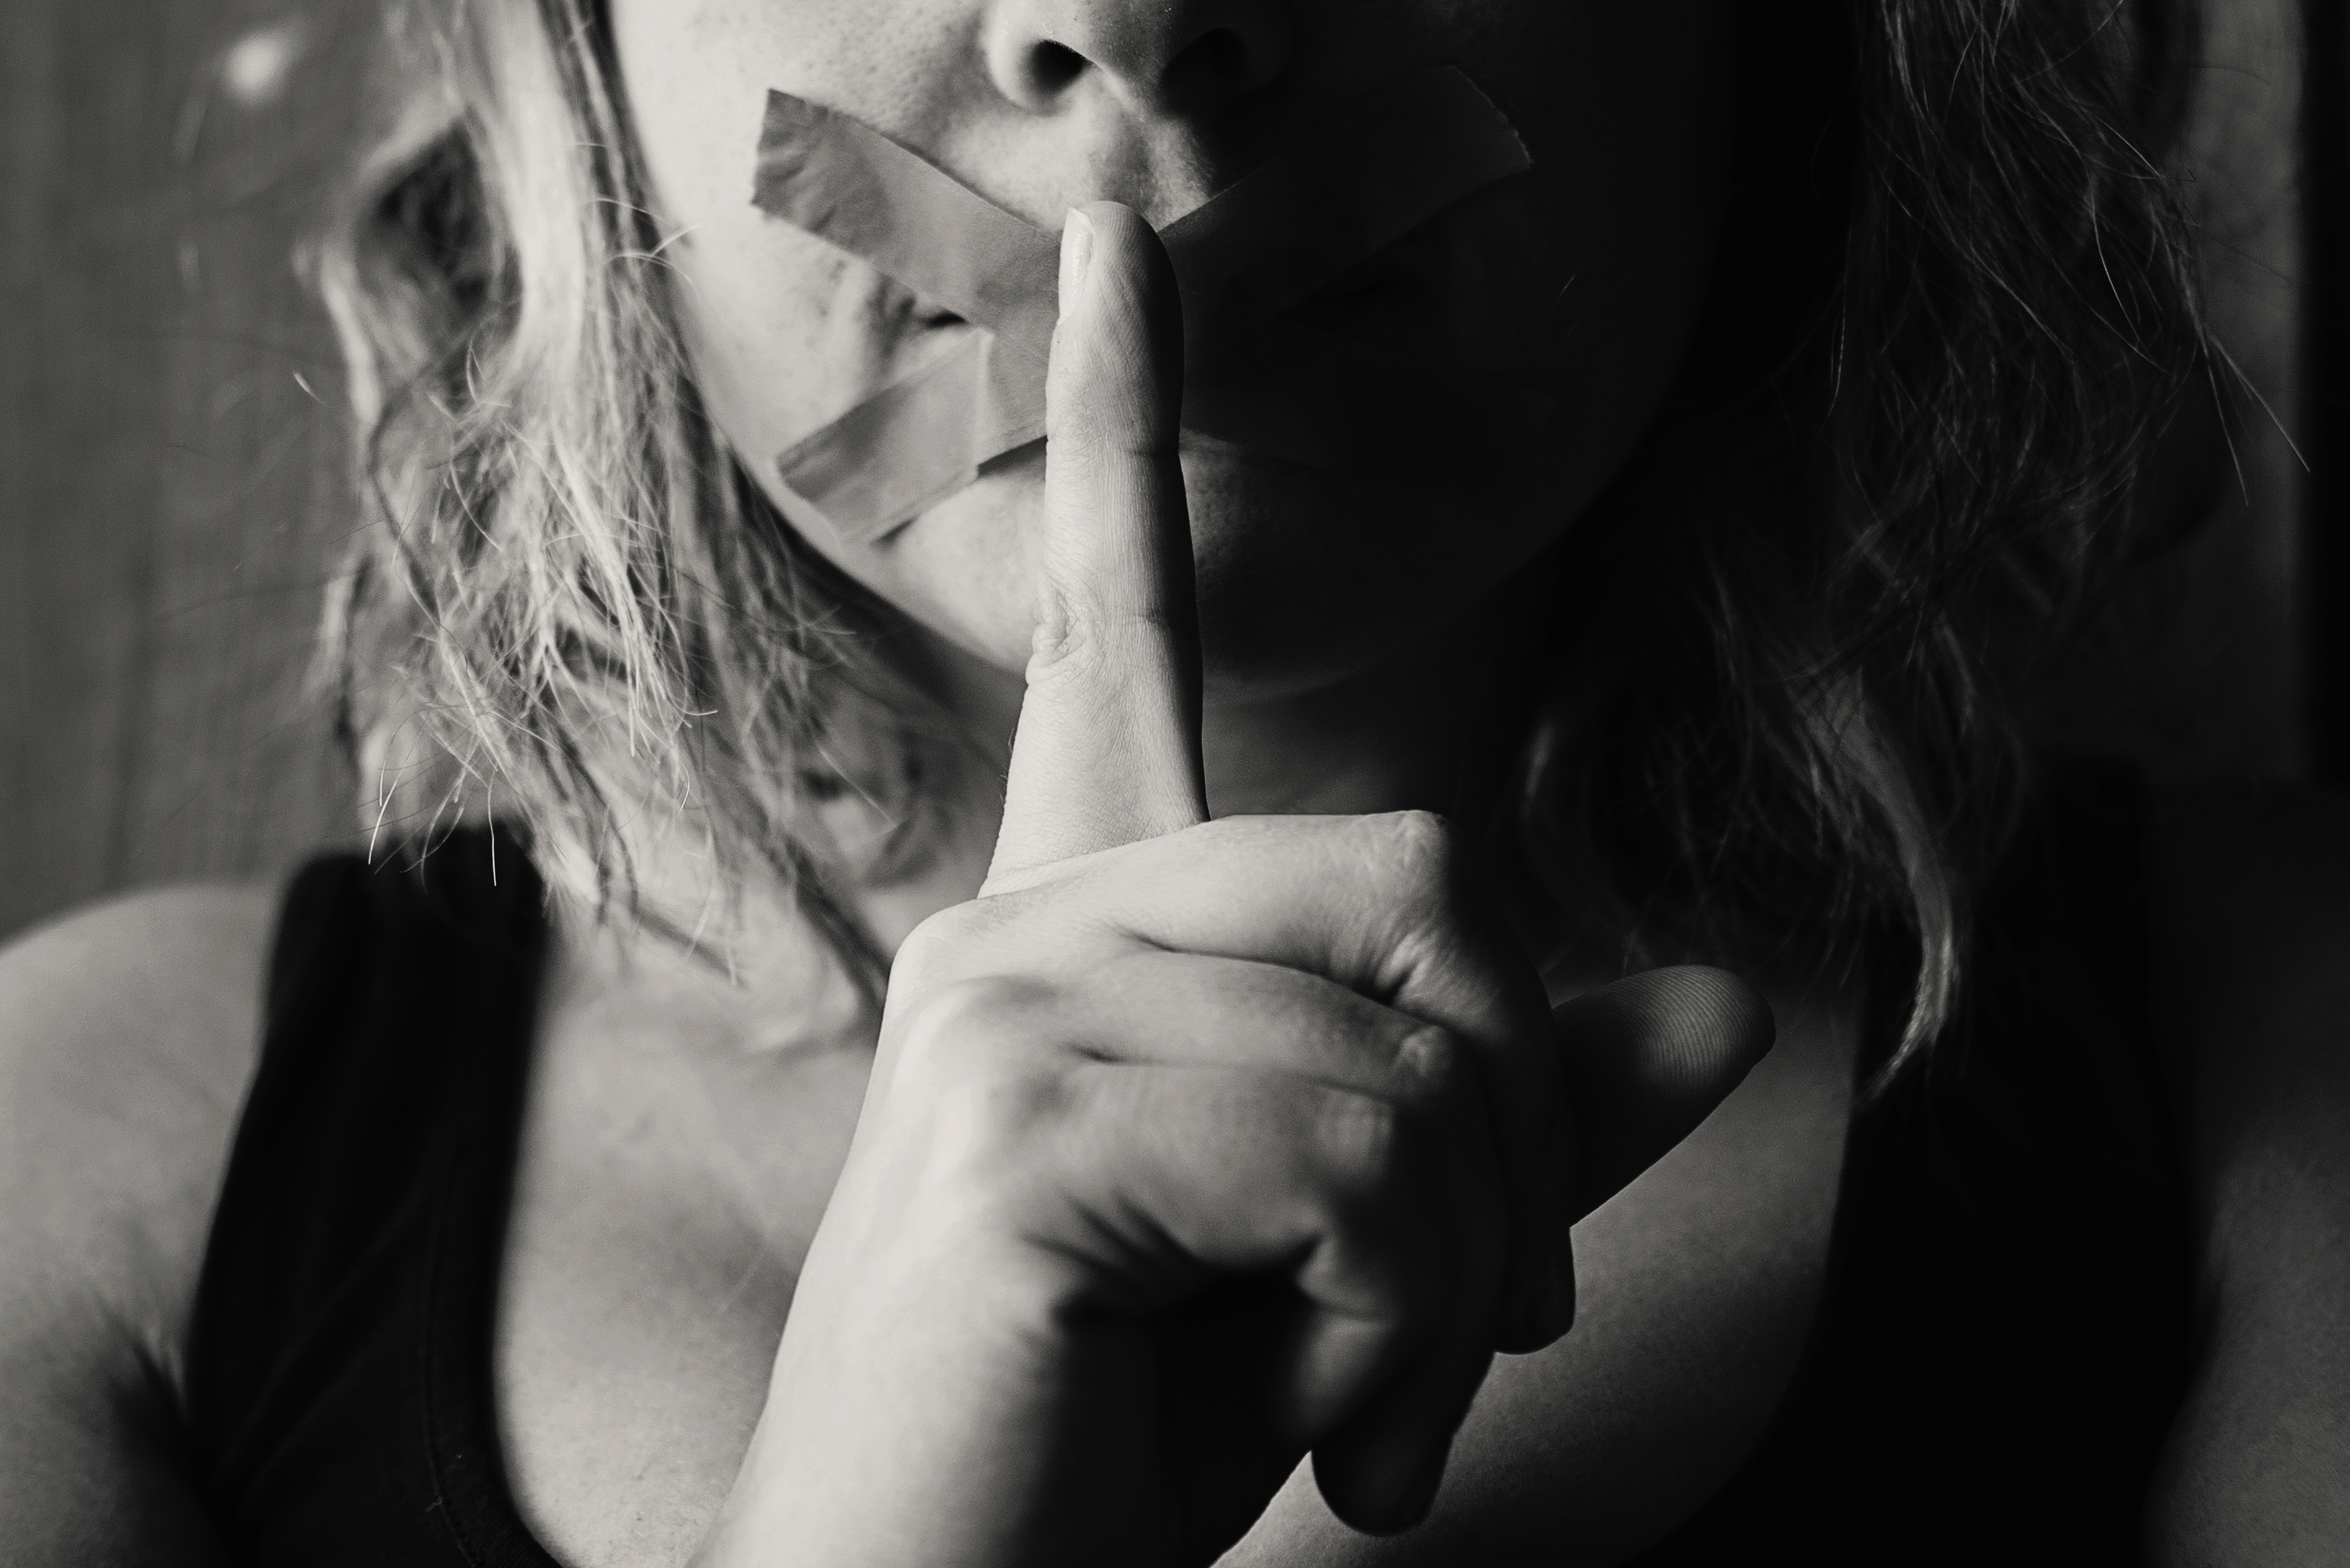 A black and white photo of a woman placing her finger over her lips. Her lips have been sealed by a plaster-like material